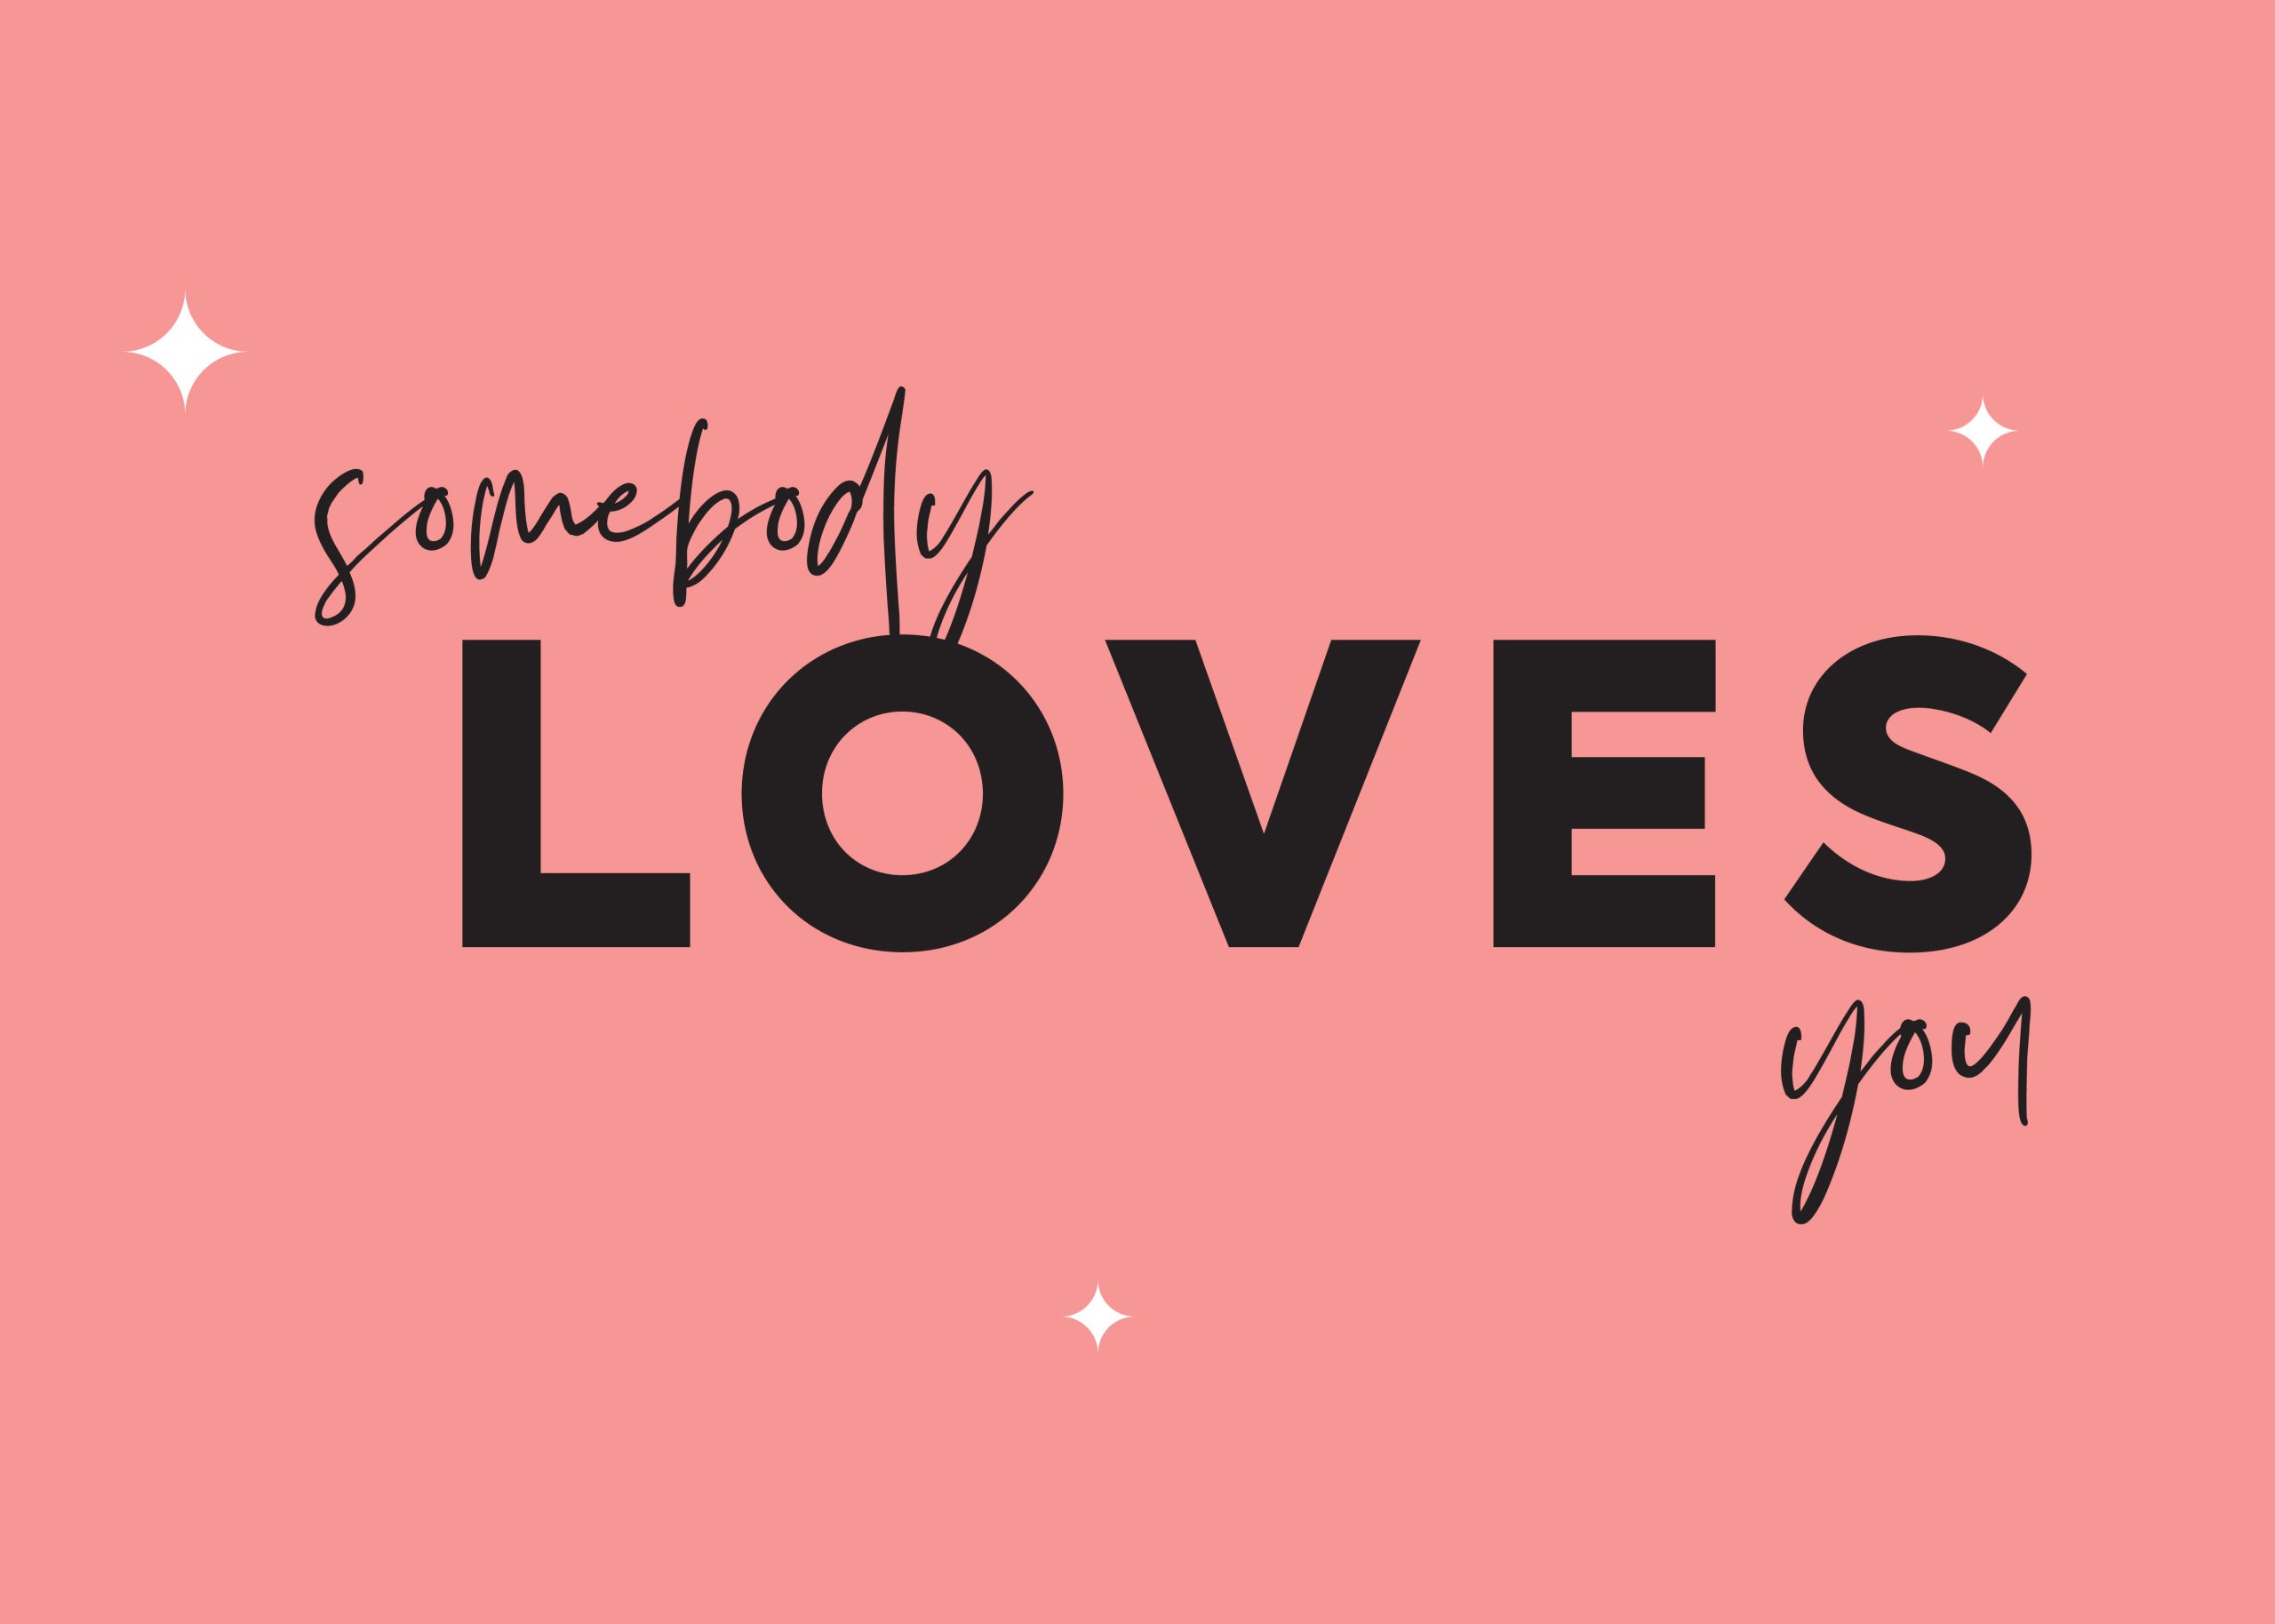 Gift Card - Somebody Loves You (Pink)